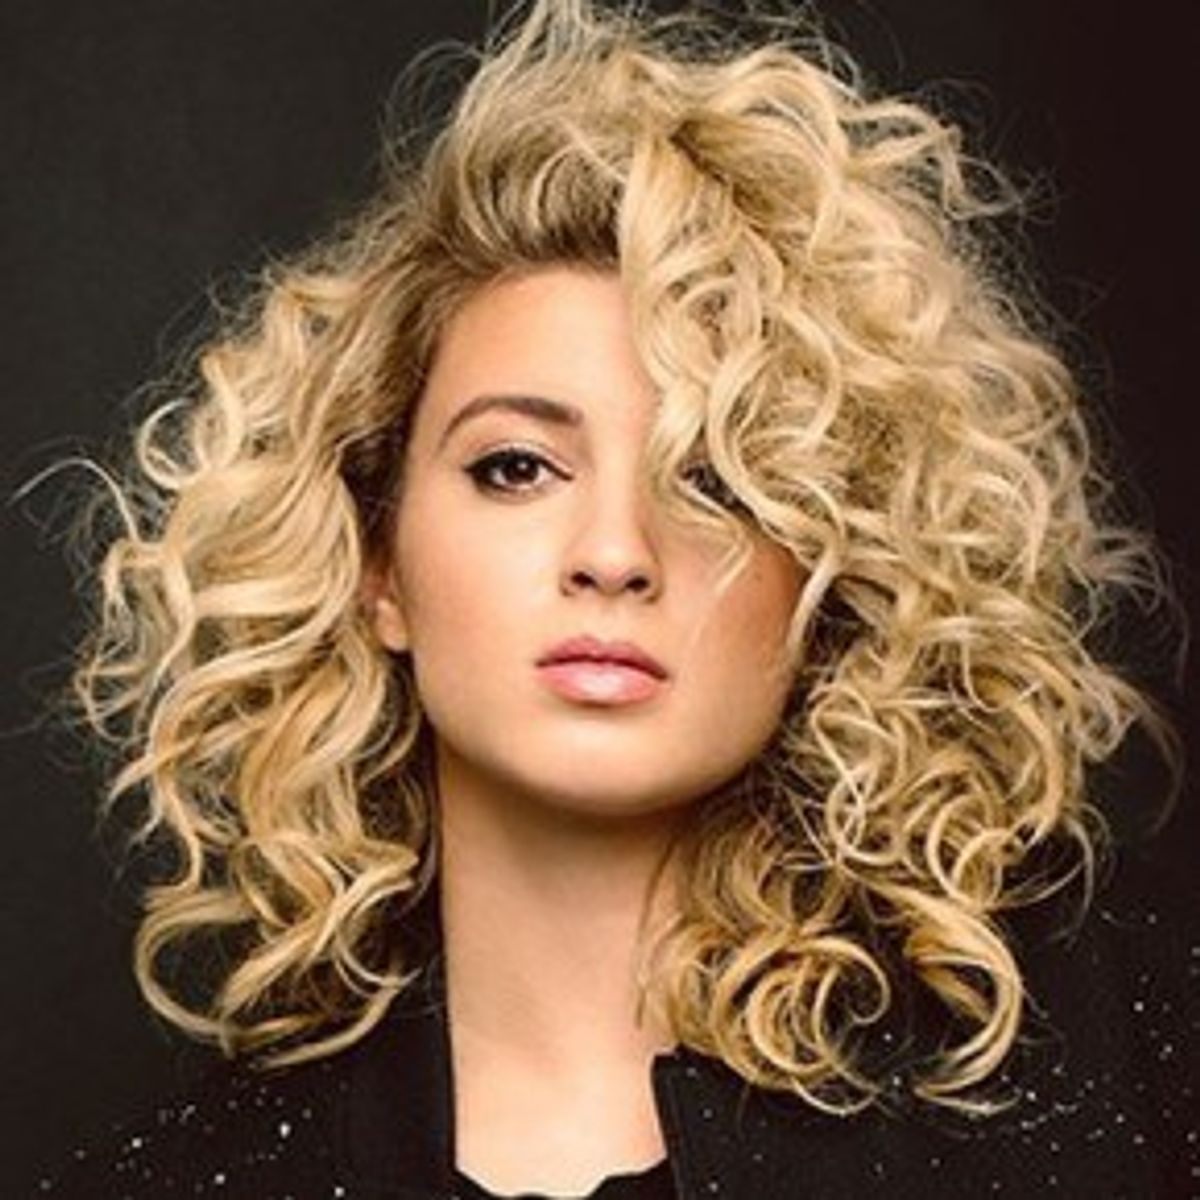 6 Reasons Why You Should Be Listening To Tori Kelly